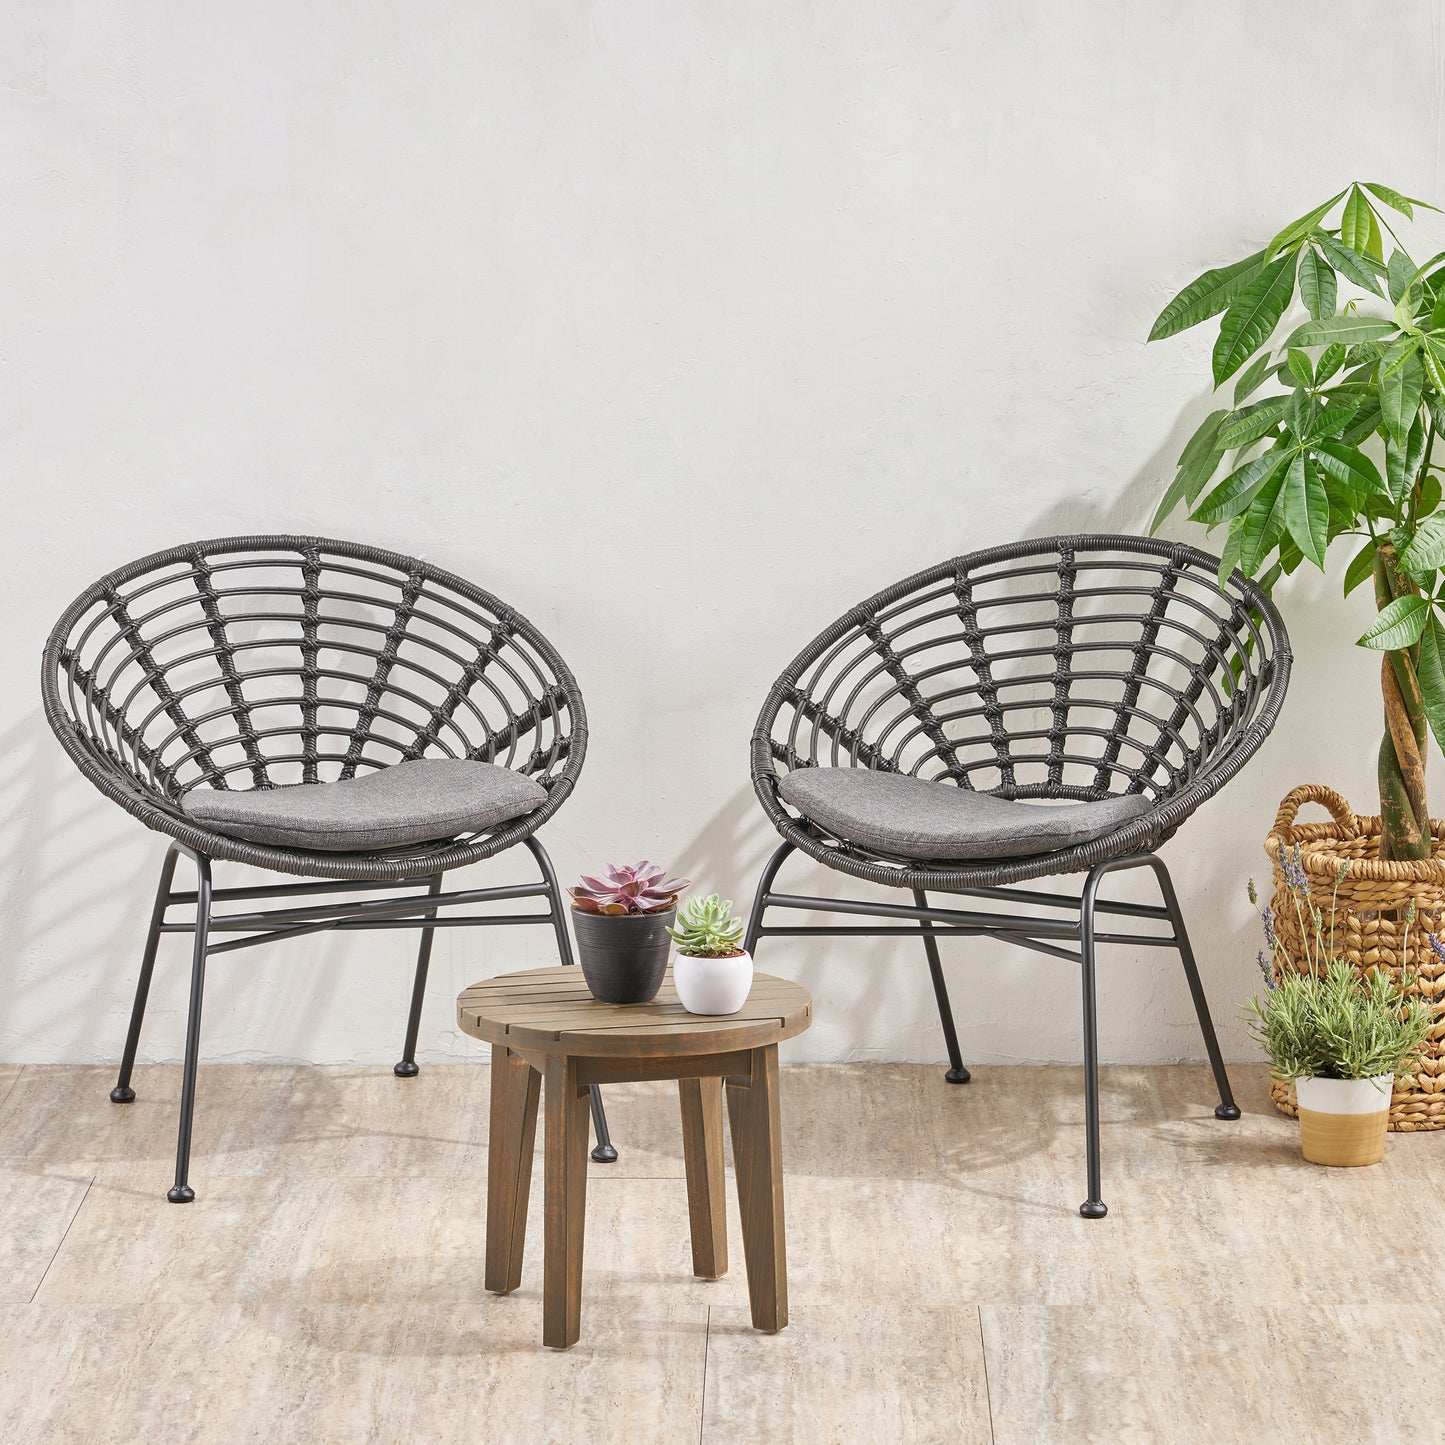 Heloise Outdoor 2 Seater Acacia Wood Chat Set